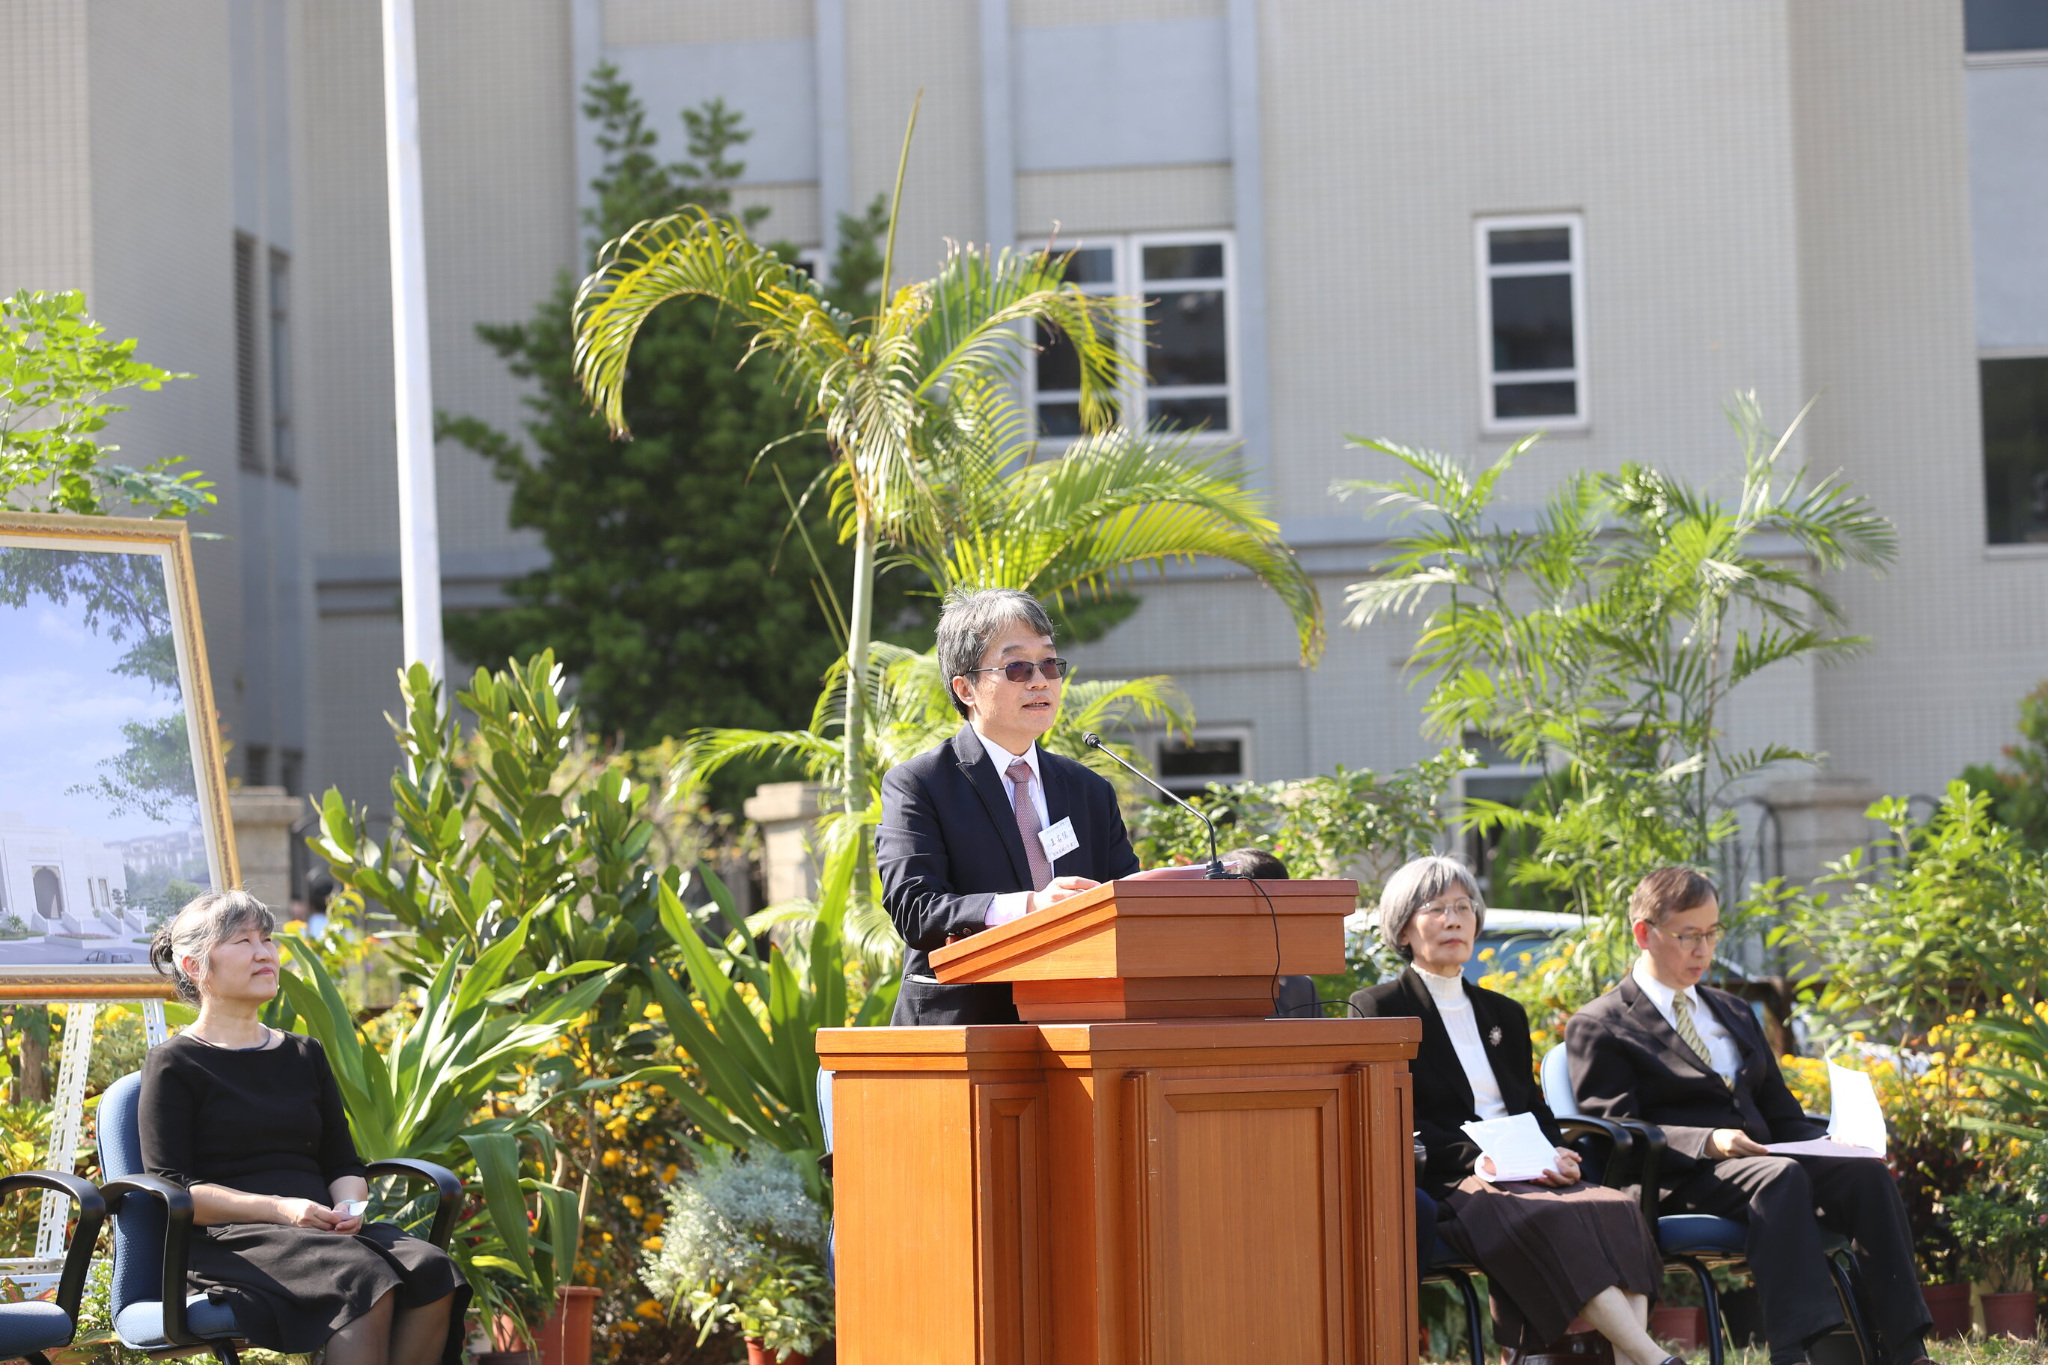 A man wearing a suit and tie and speaking from a pulpit outside.